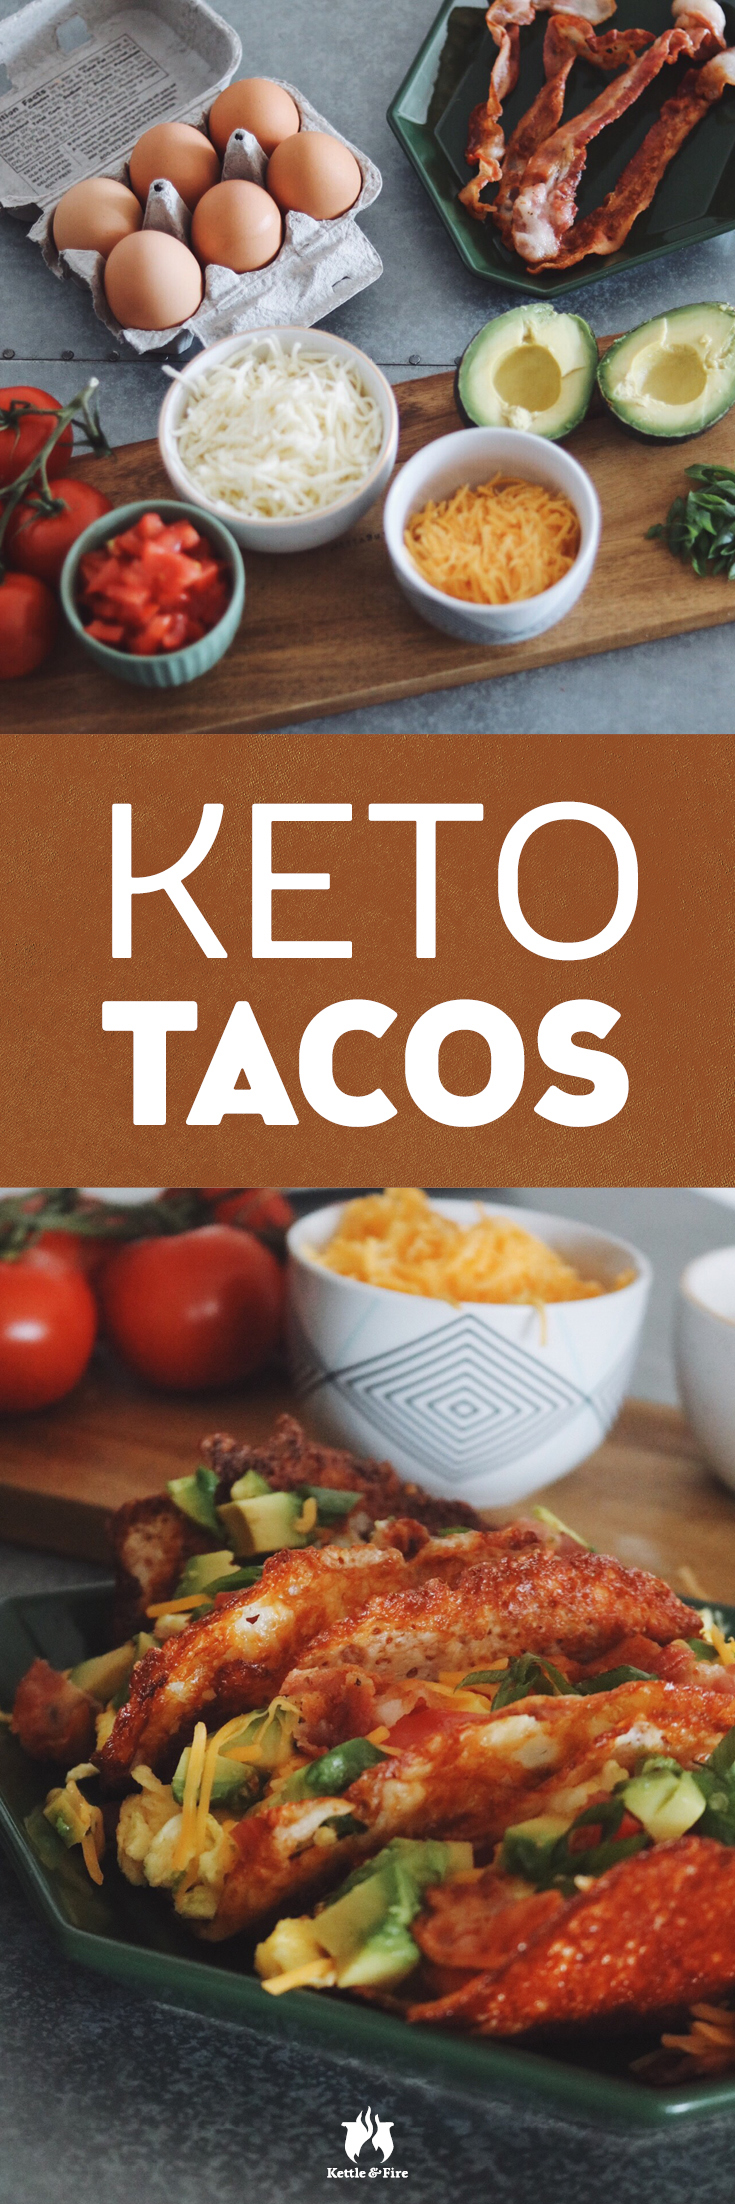 Scrambled eggs, avocado, tomato and bacon filled in warm and crunchy mozzarella shells, these keto tacos are are guaranteed to wake up your taste buds.